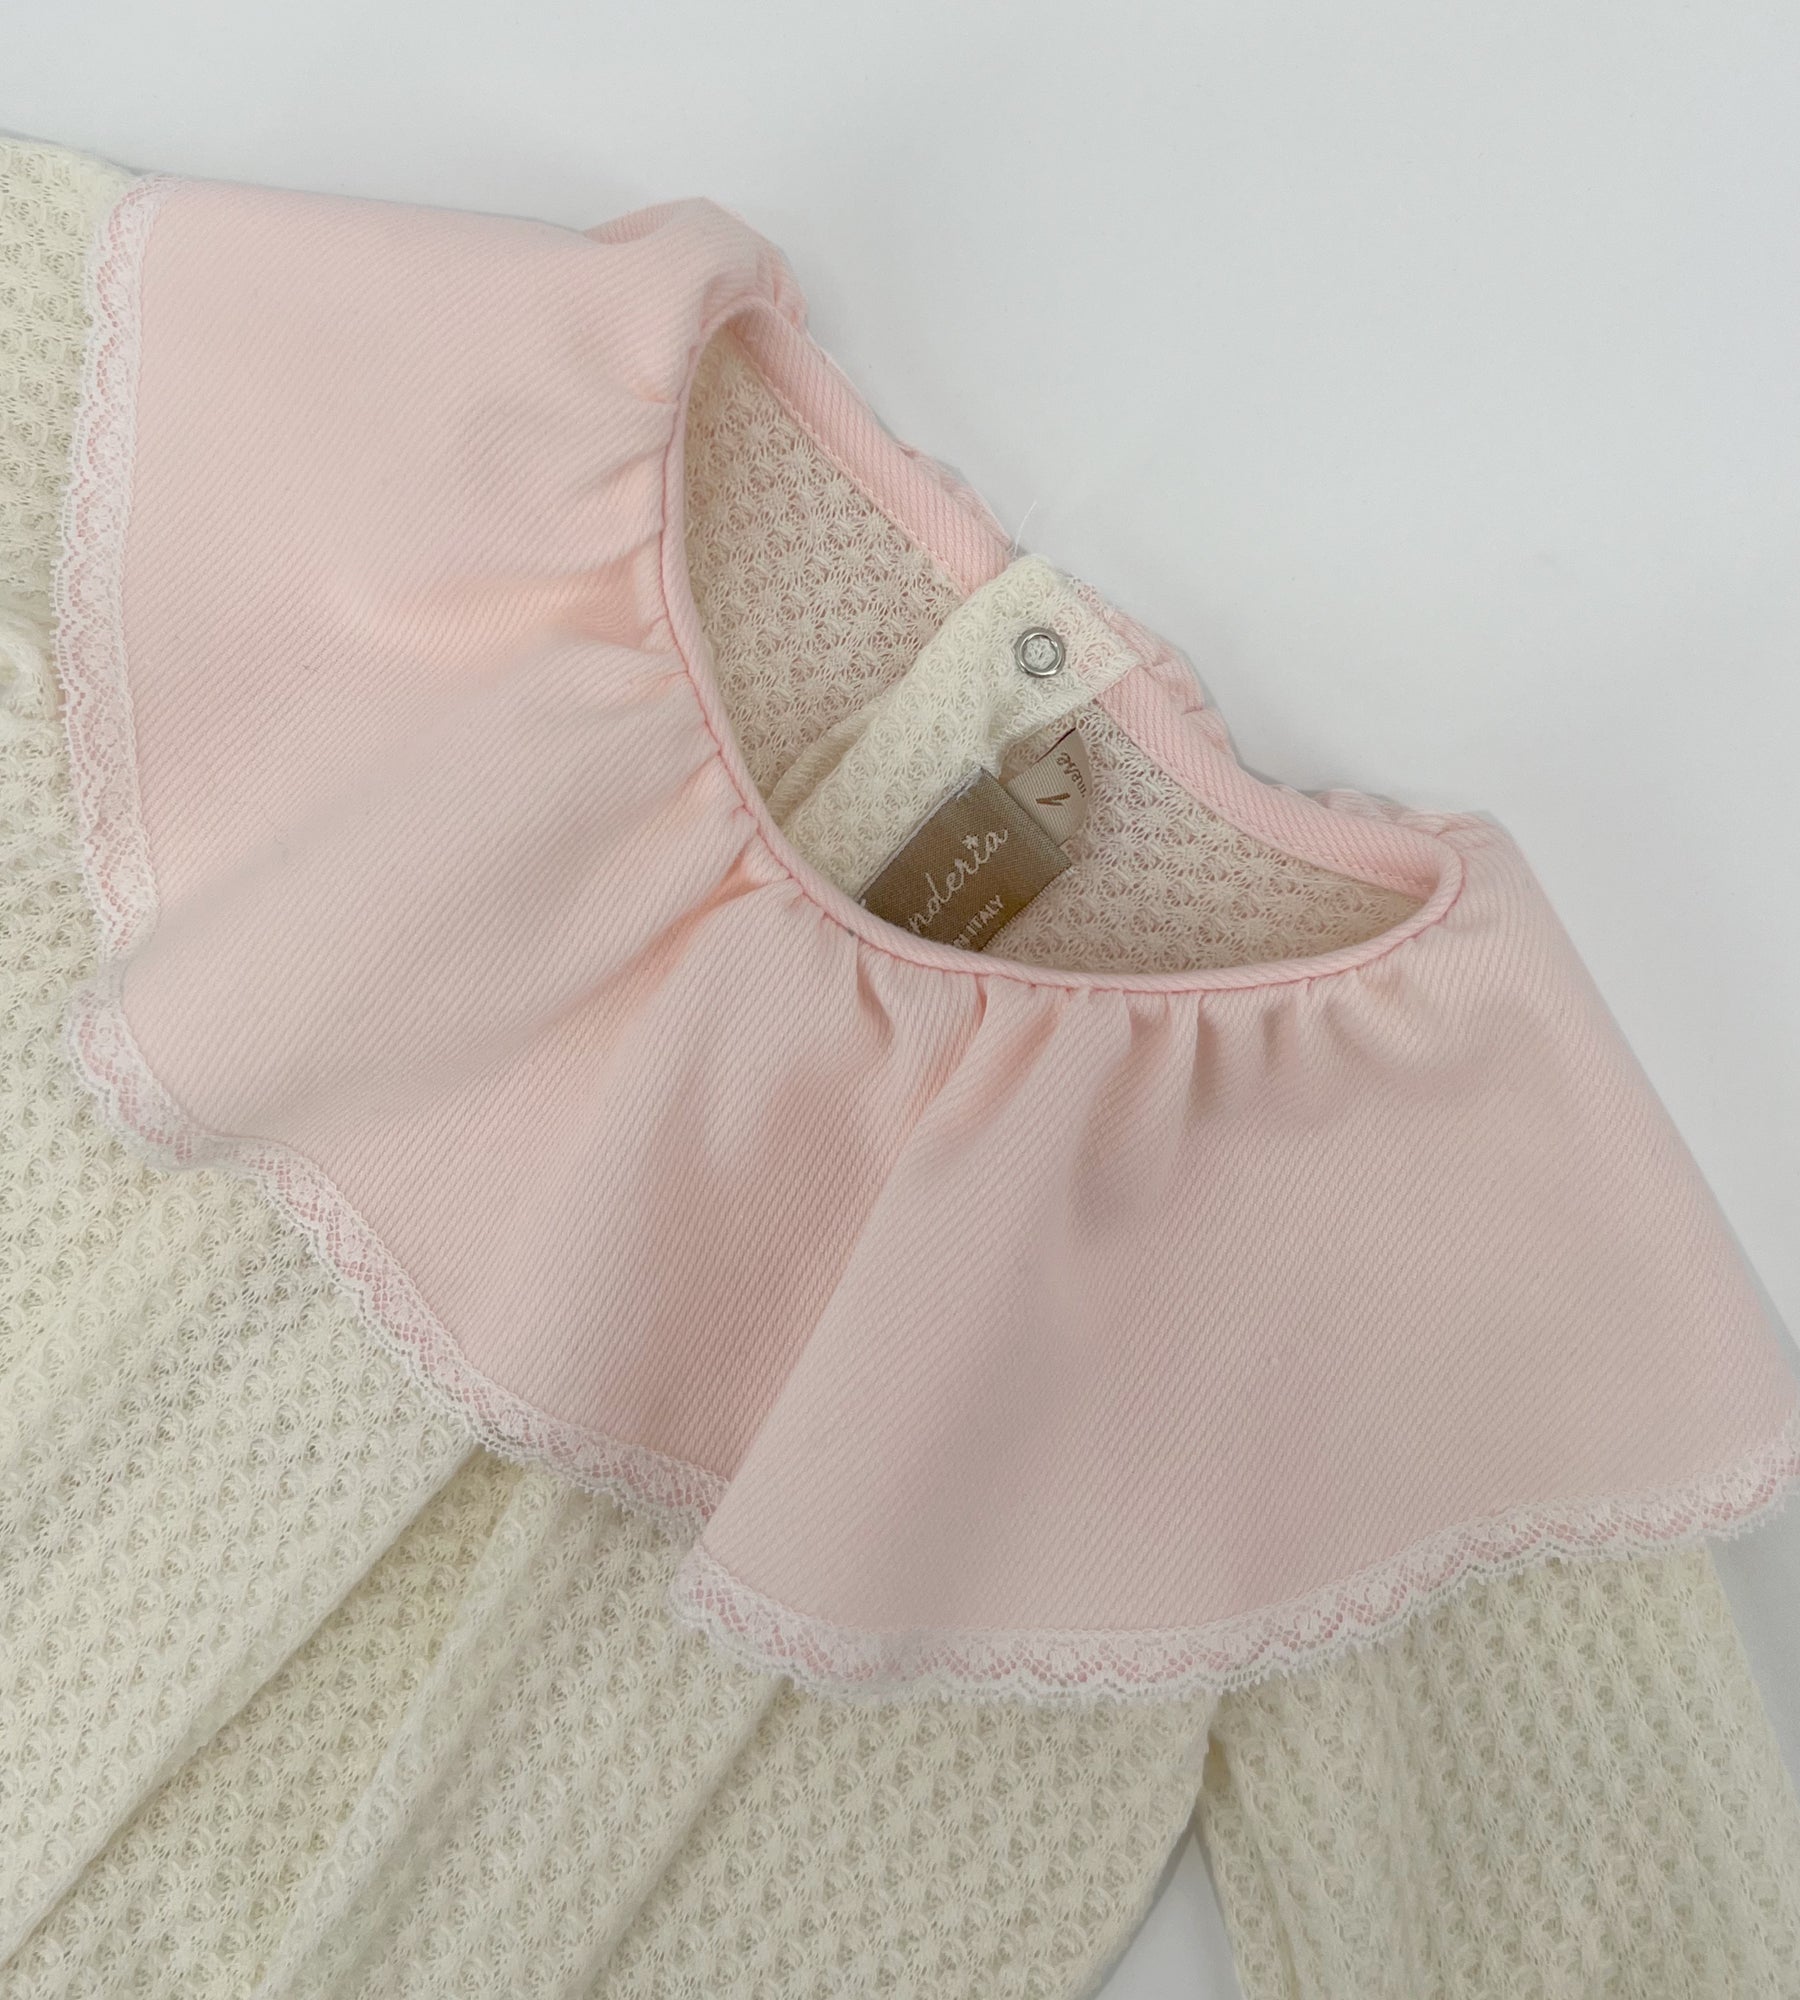 PINK VOULANT NECK SWEATER OVERALL